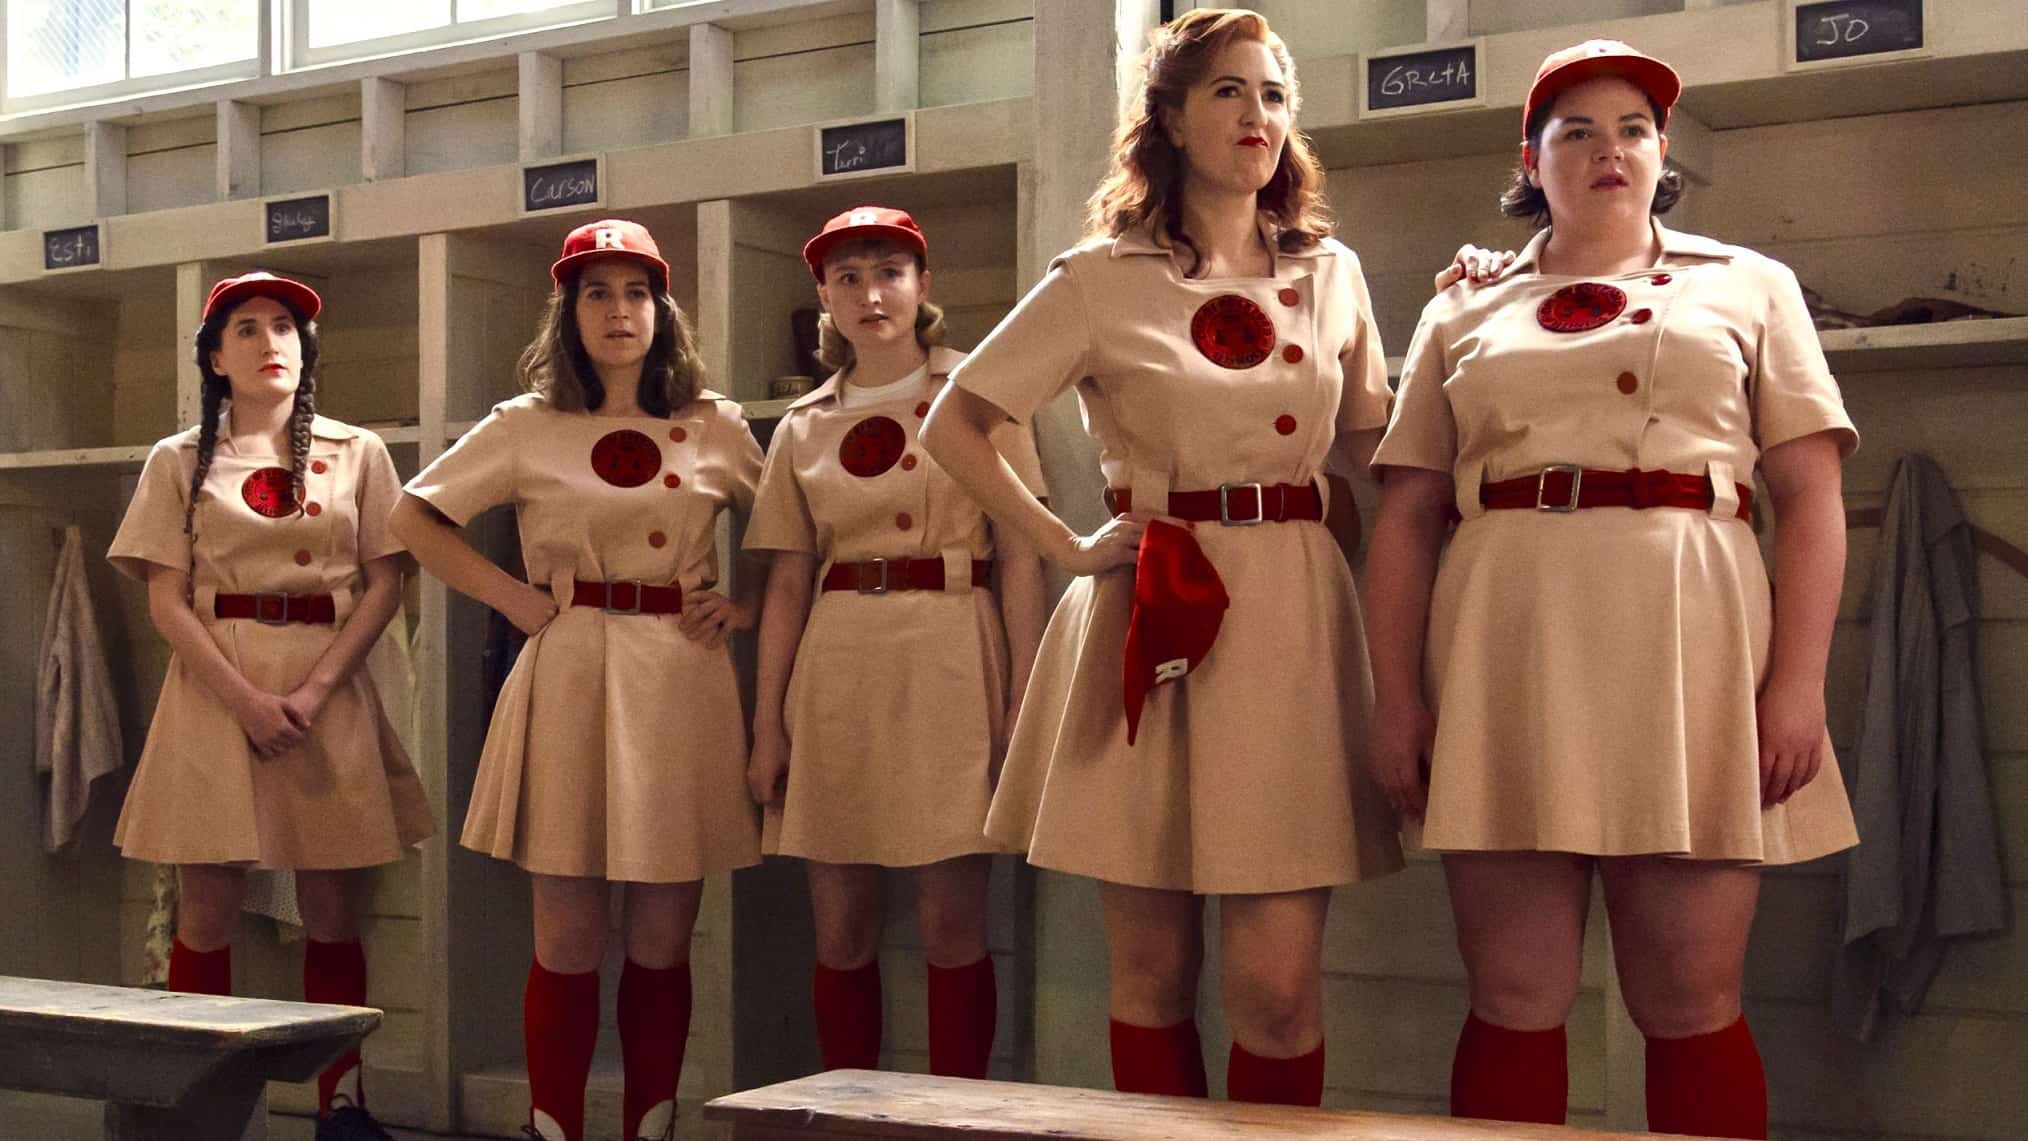 Main cast of the show, A League Of Their Own